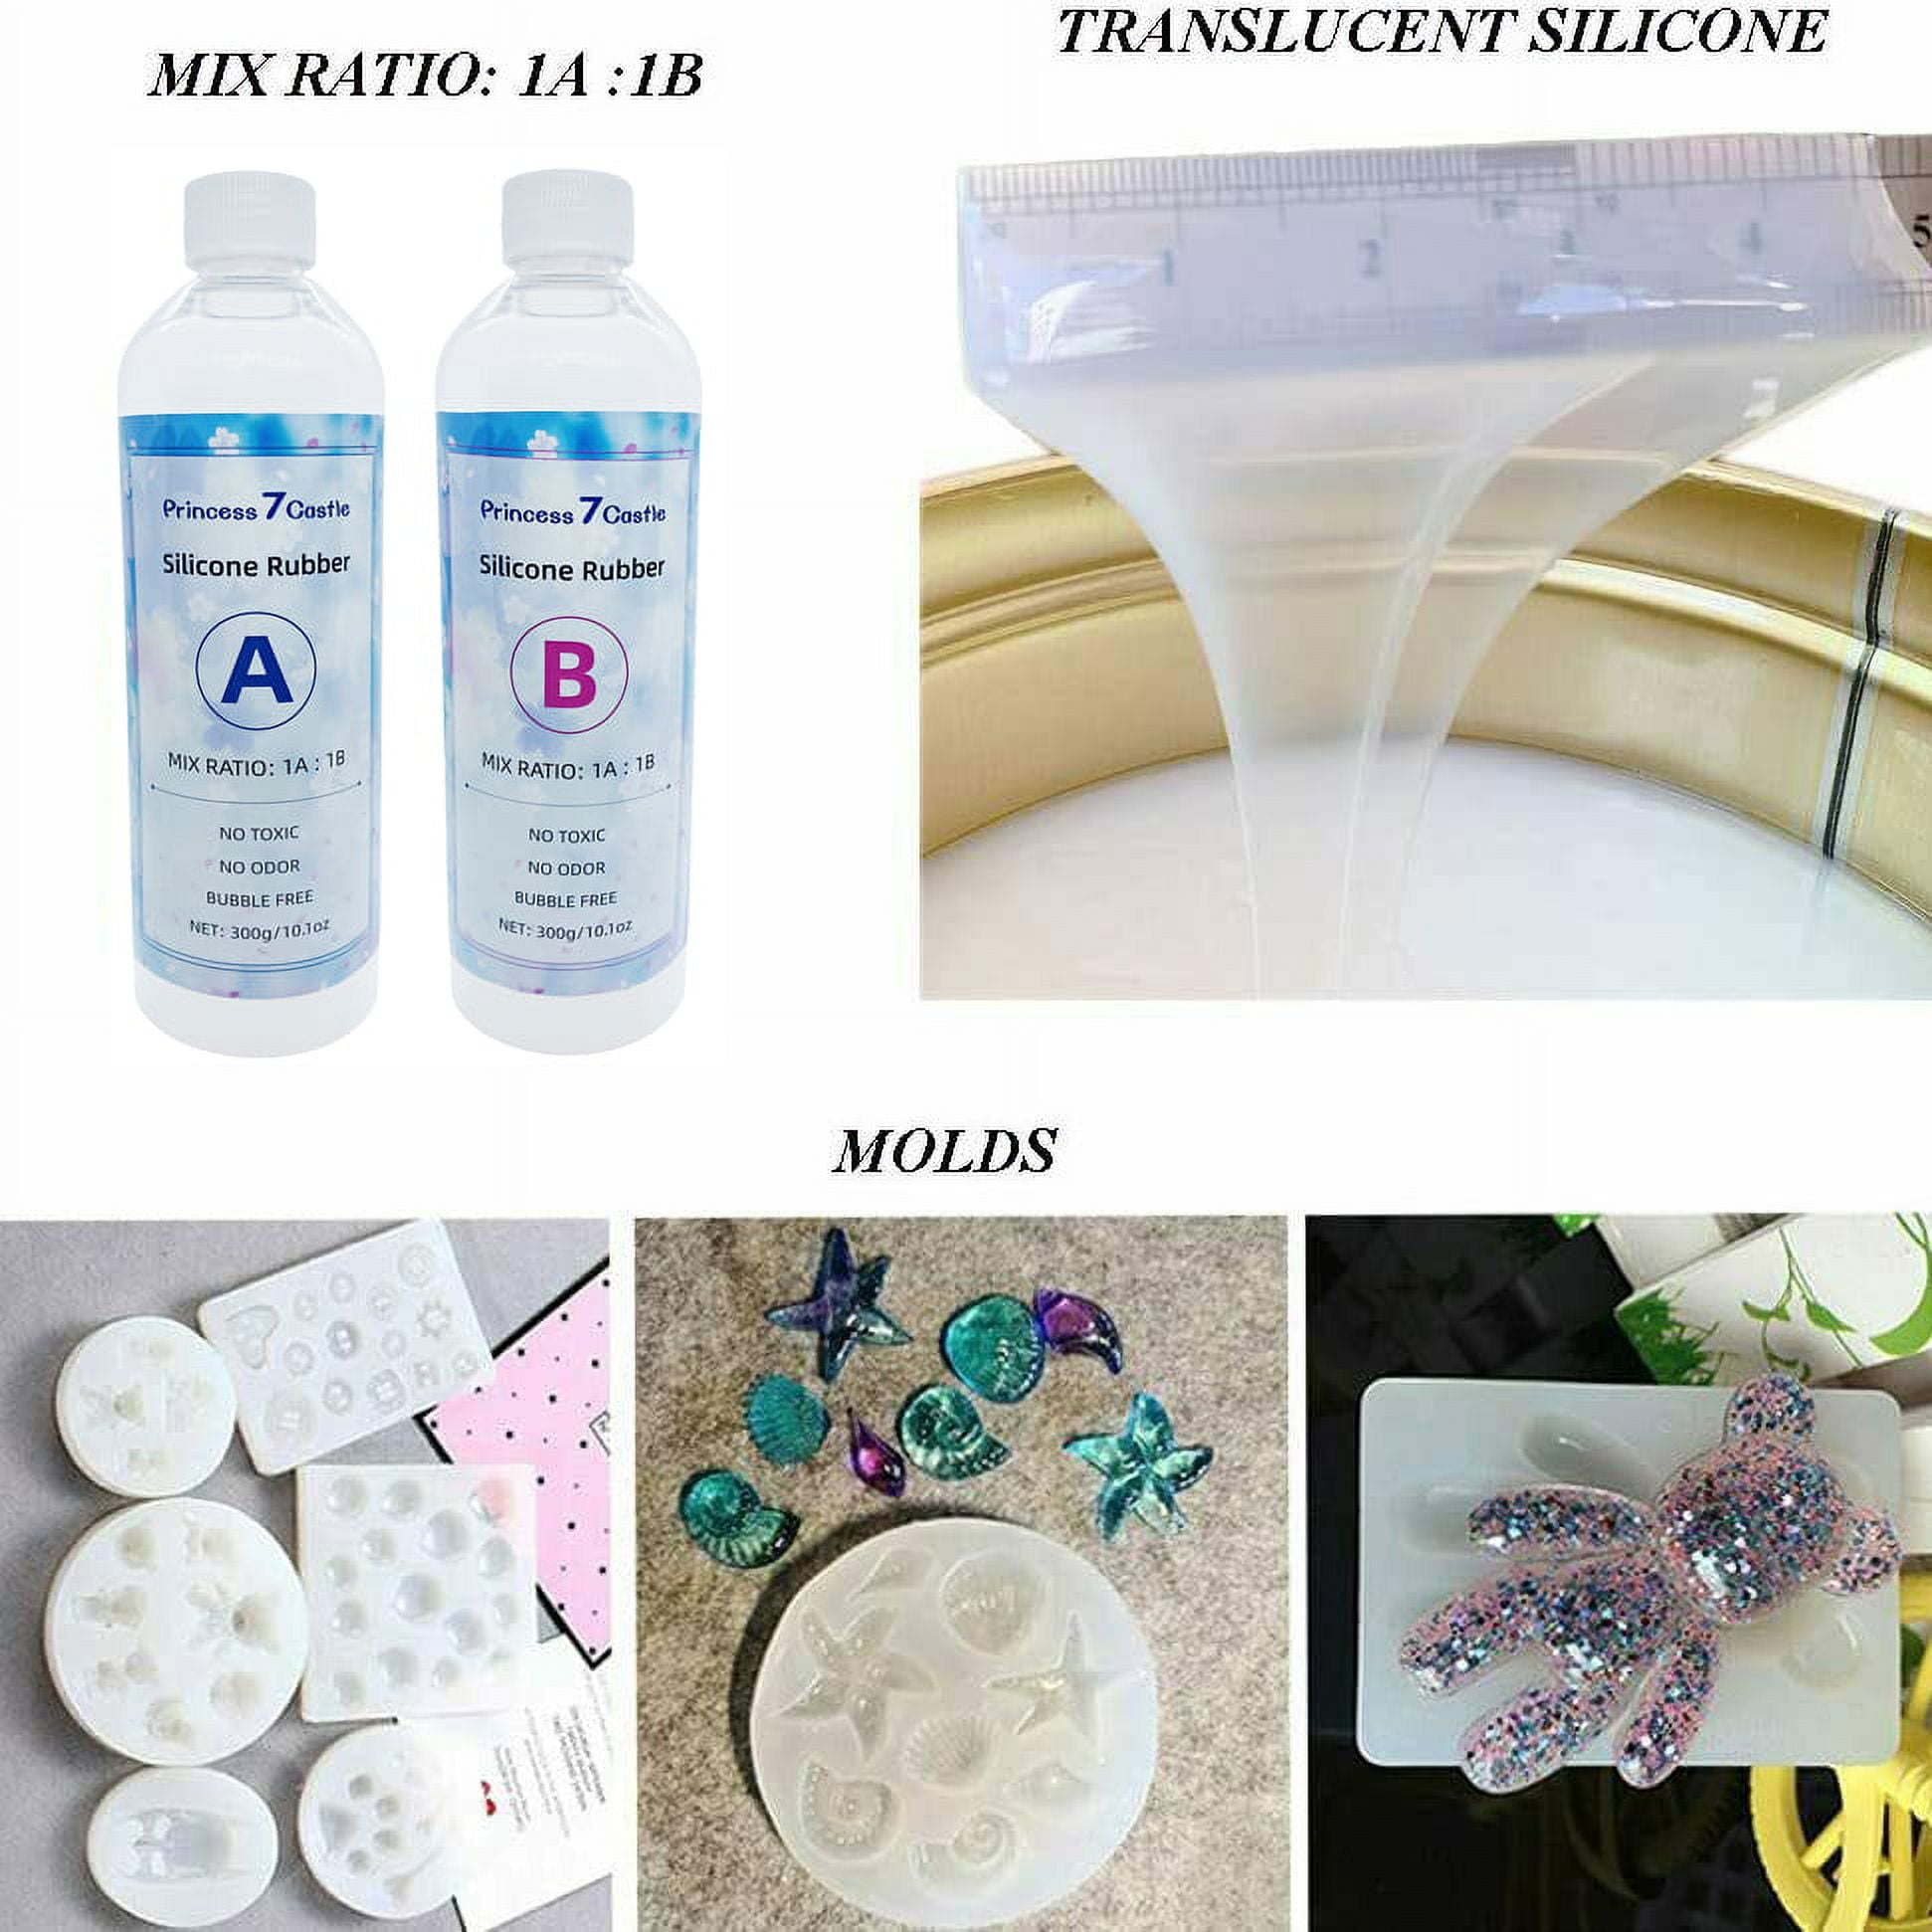 Silicone Mold Making Kit Liquid Silicone Rubber Non-Toxic Translucent Clear Mold  Making Silicone-Mixing Ratio 1:1-Molding Silicone for Resin Molds,Silicone  Molds DIY Manual Making (N.W 20.2oz) 